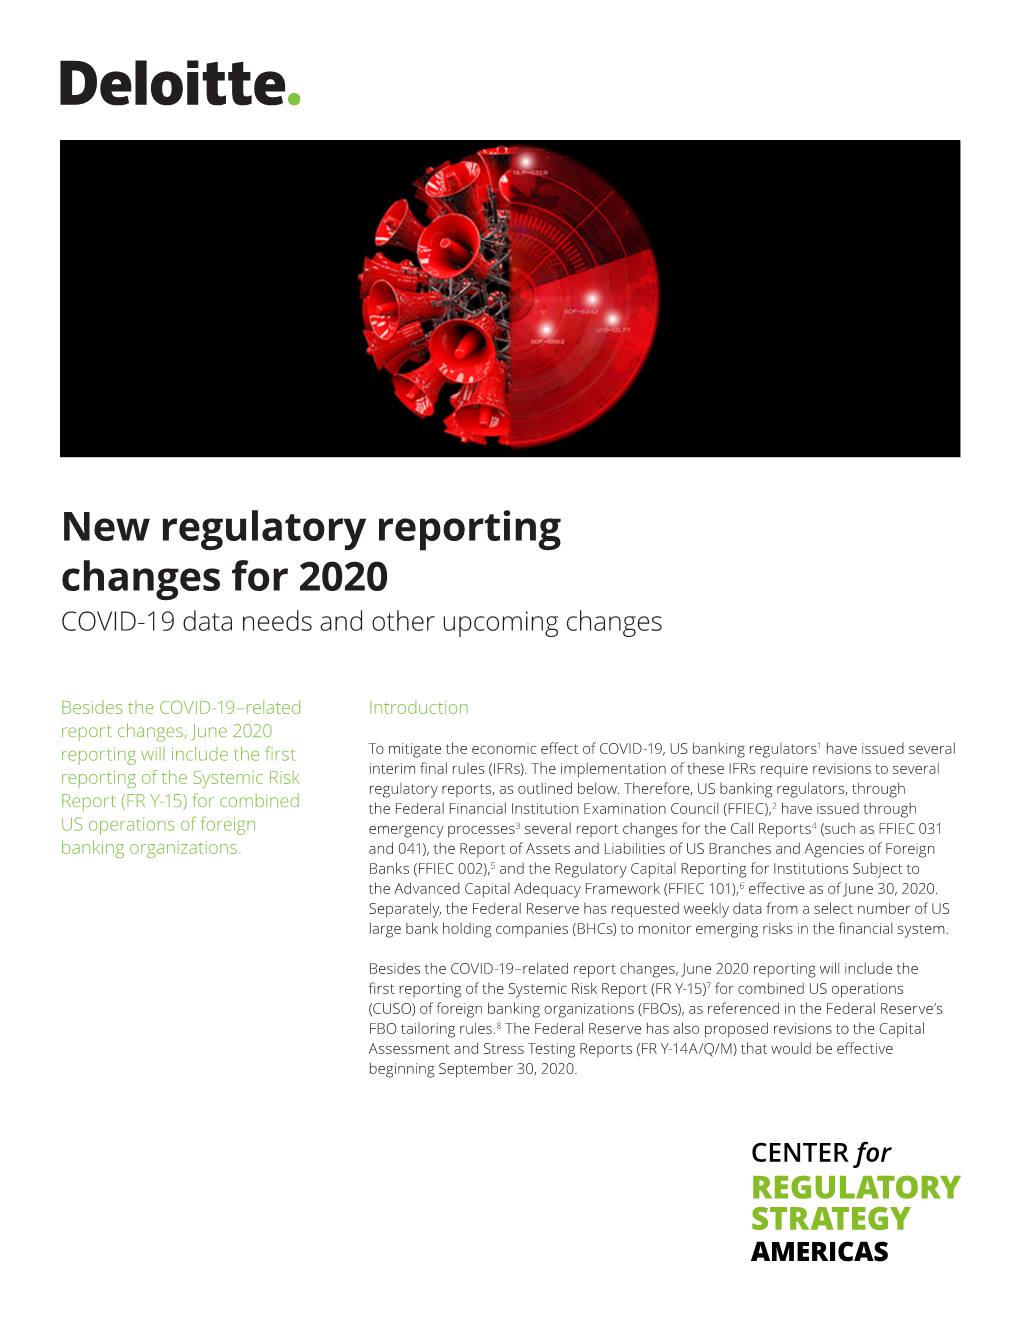 New Regulatory Reporting Changes for 2020 COVID-19 Data Needs and Other Upcoming Changes